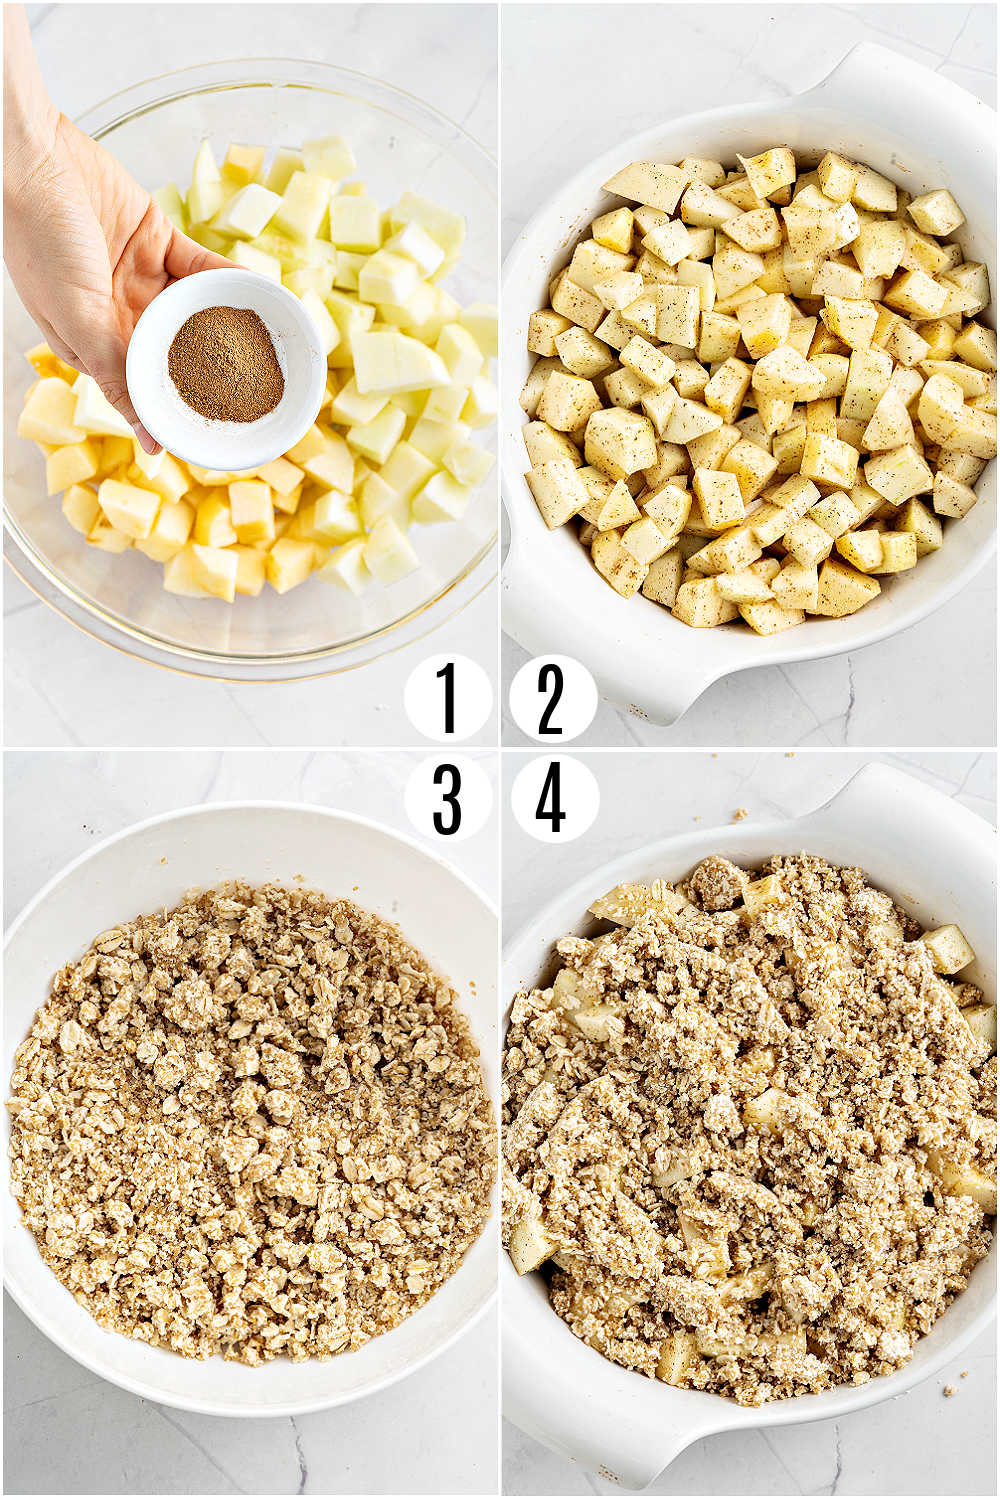 Step by step photos showing how to make apple crisp.